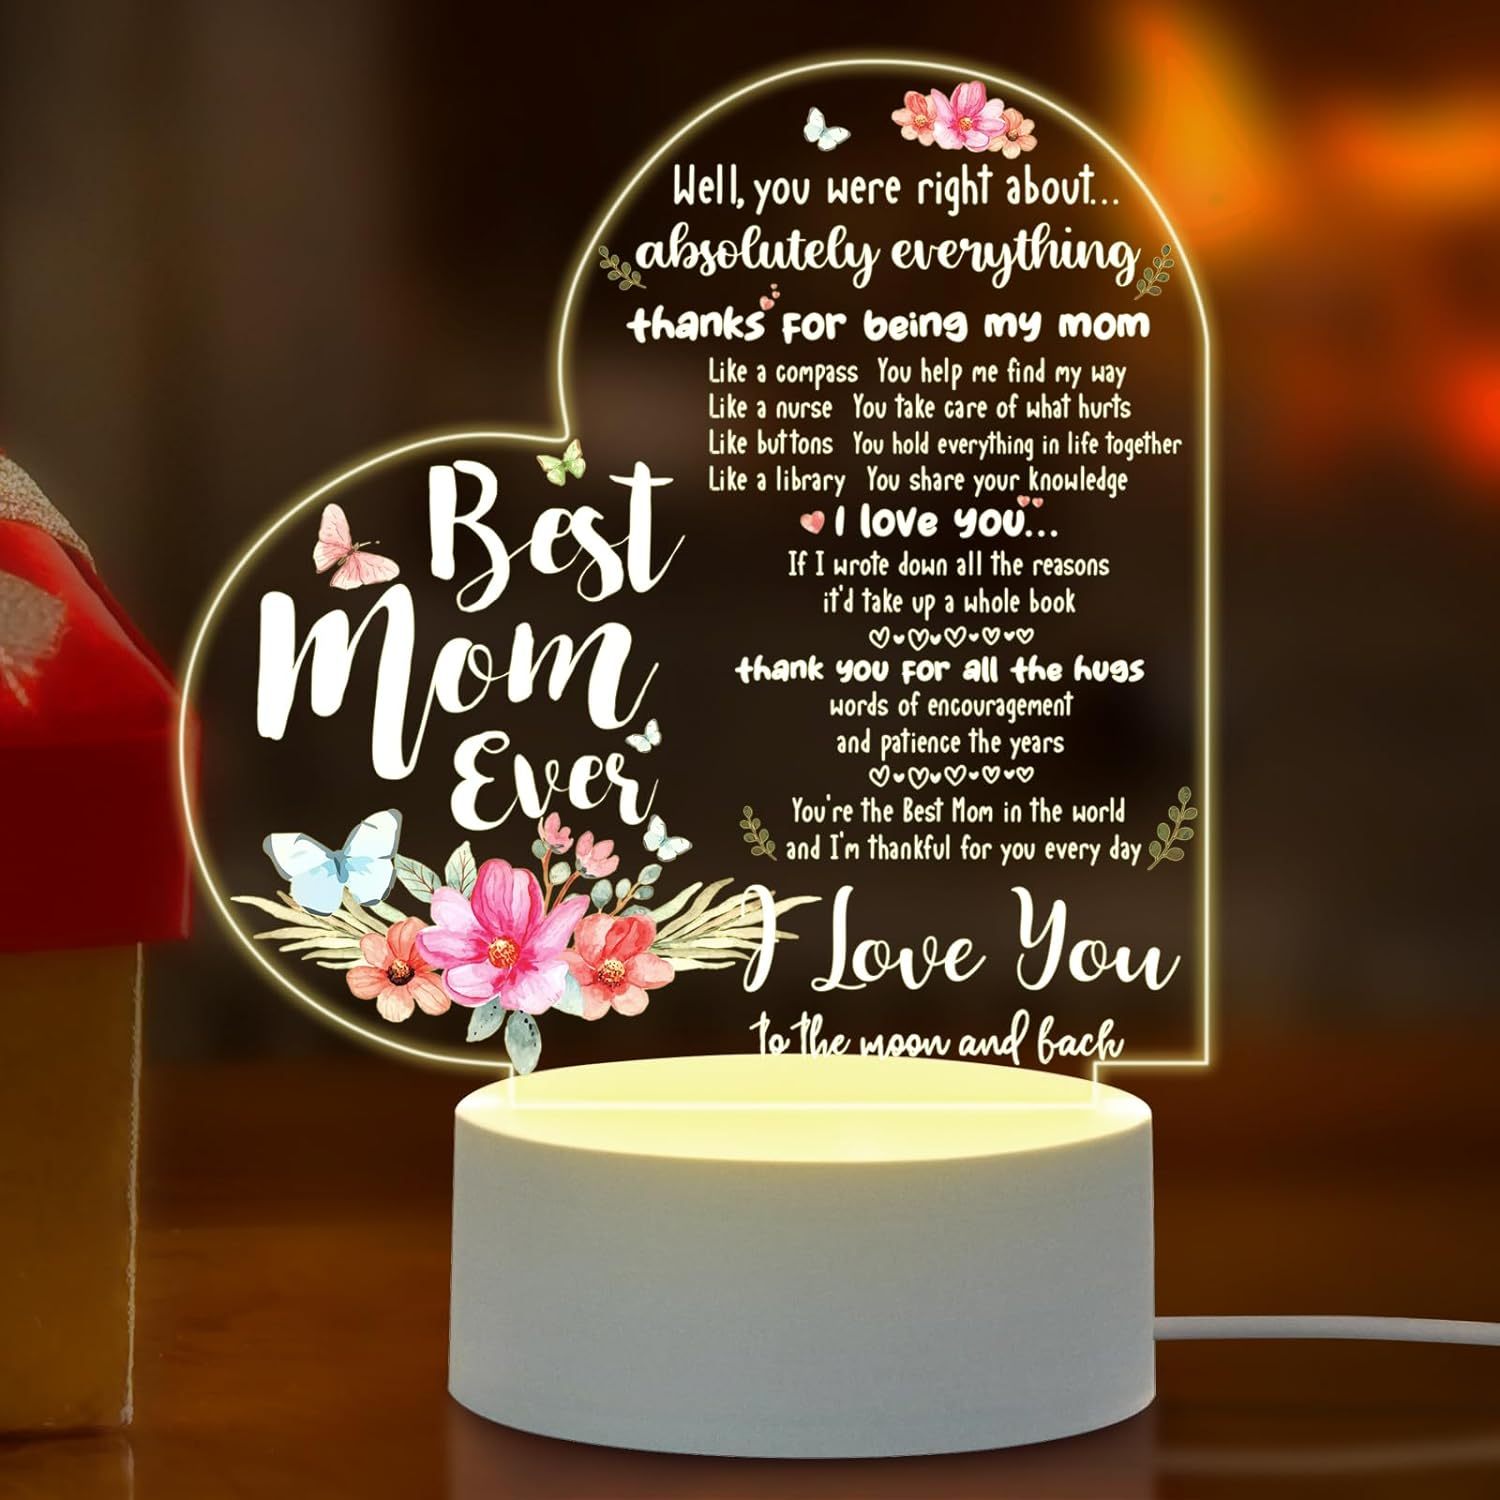 

Gifts For Mom From Daughter Son, Acrylic Night Light Gift For Mom, Best Mom Ever Gifts From Daughter, Mother's Day Gift, Mom Birthday Gifts